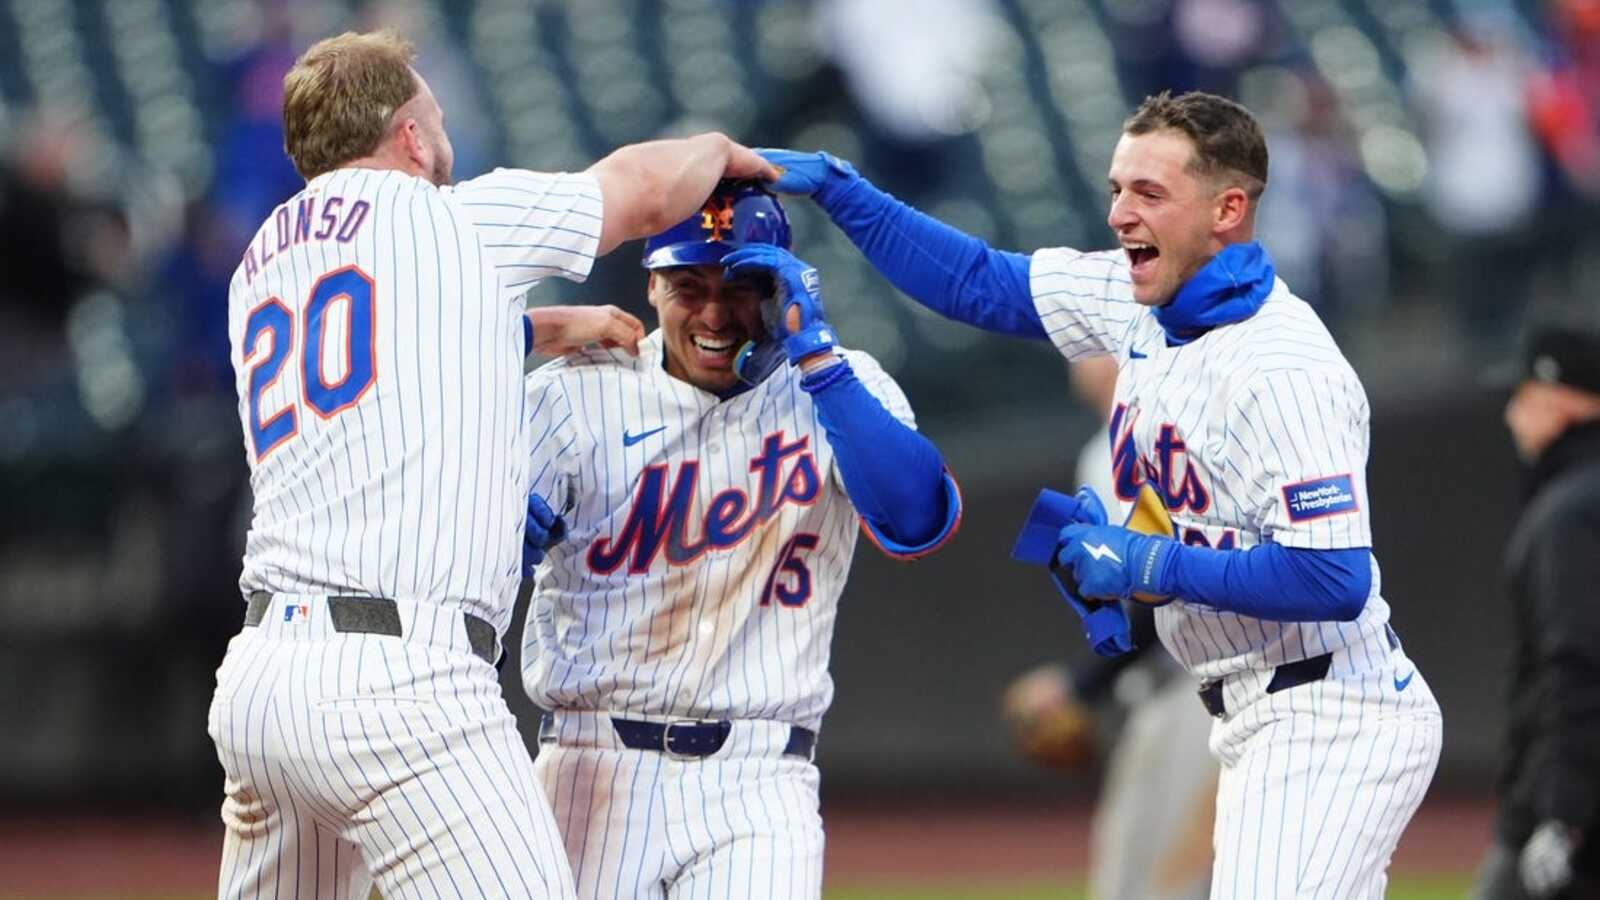 MLB roundup: Mets rally in 9th, beat Tigers to split DH